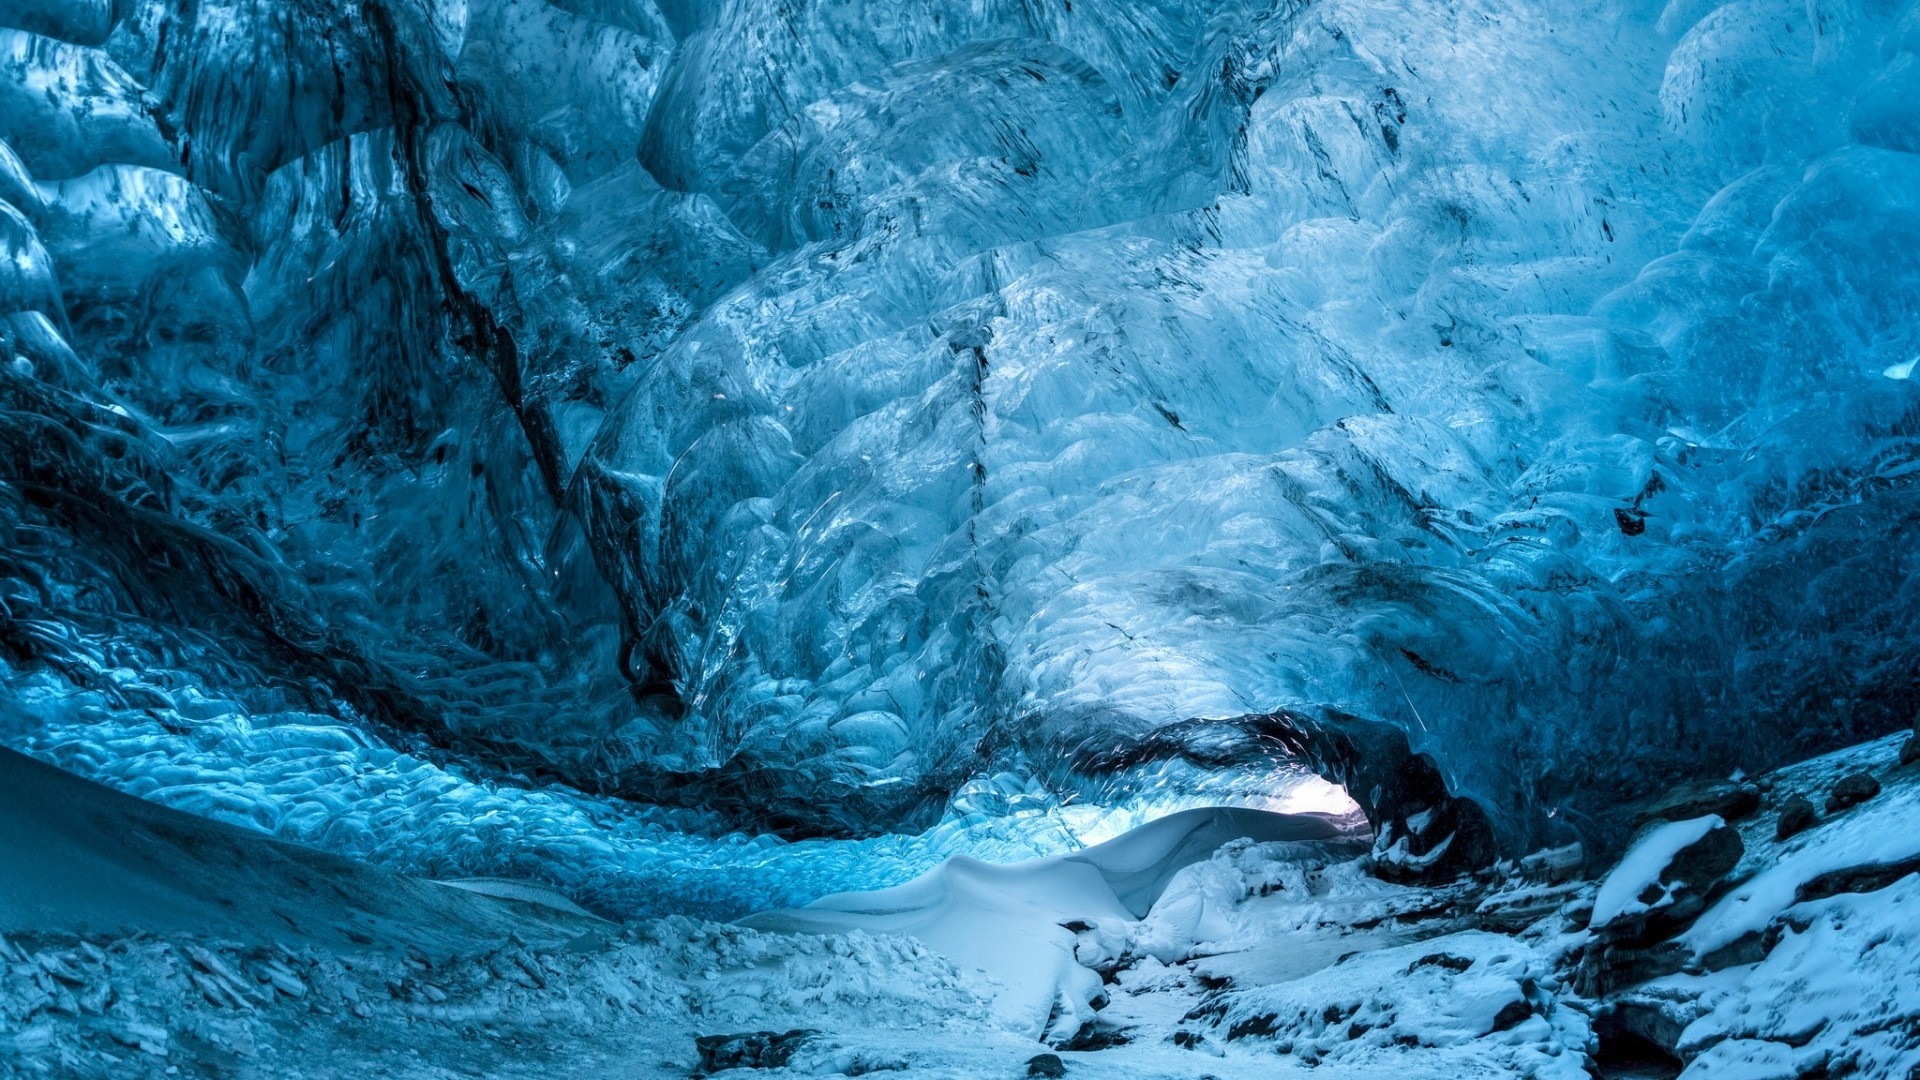 Lovely Ice Cave for 1920 x 1080 HDTV 1080p resolution